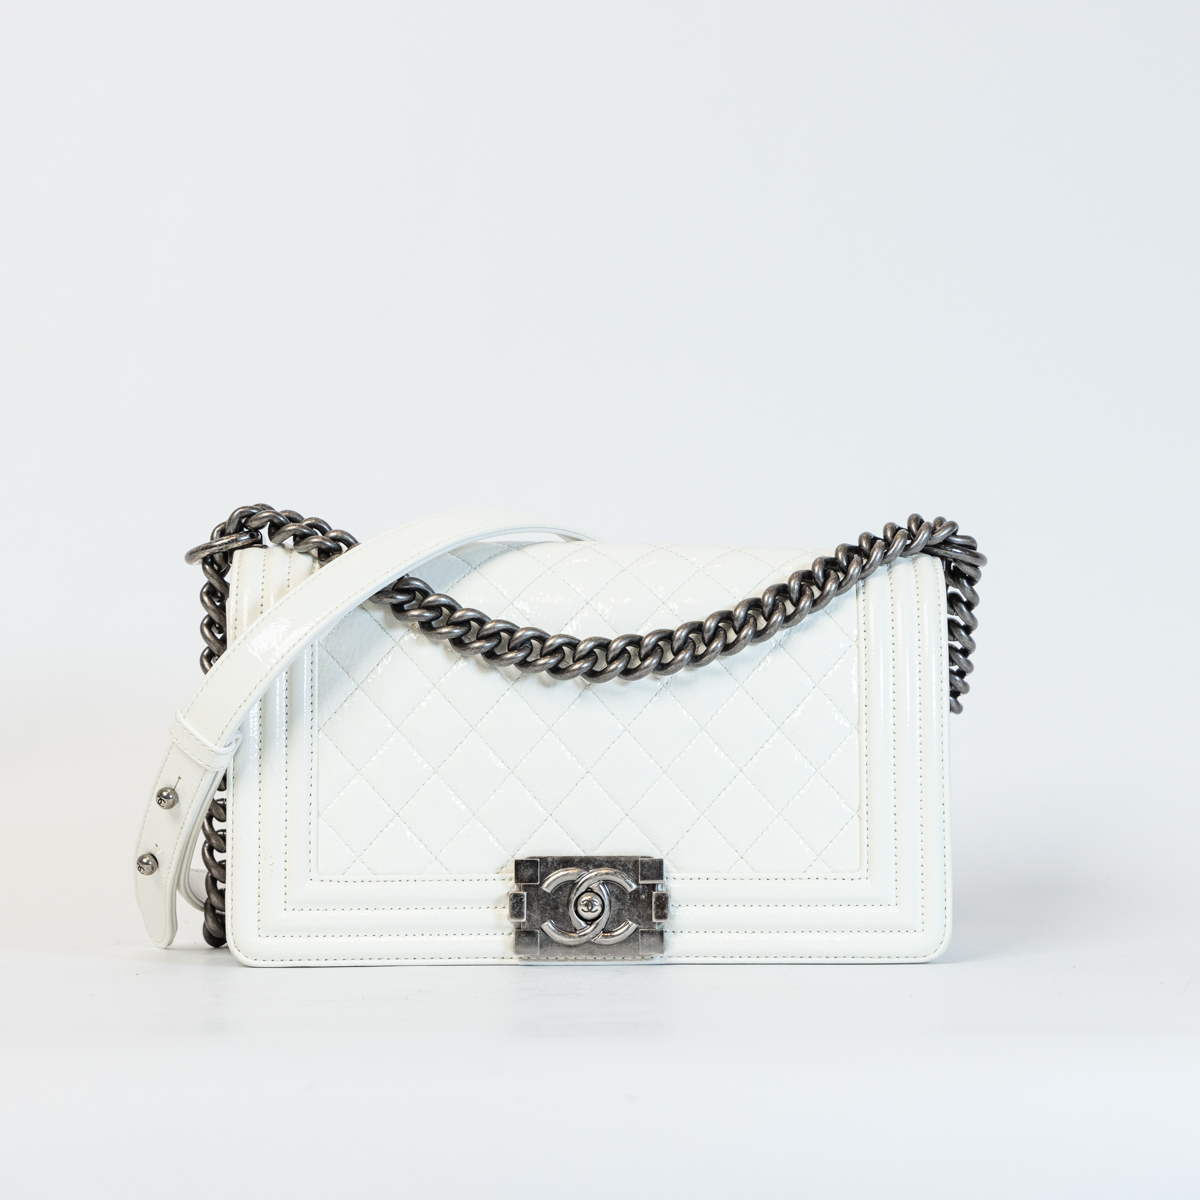 Chanel Boy White patent leather with silver hardware